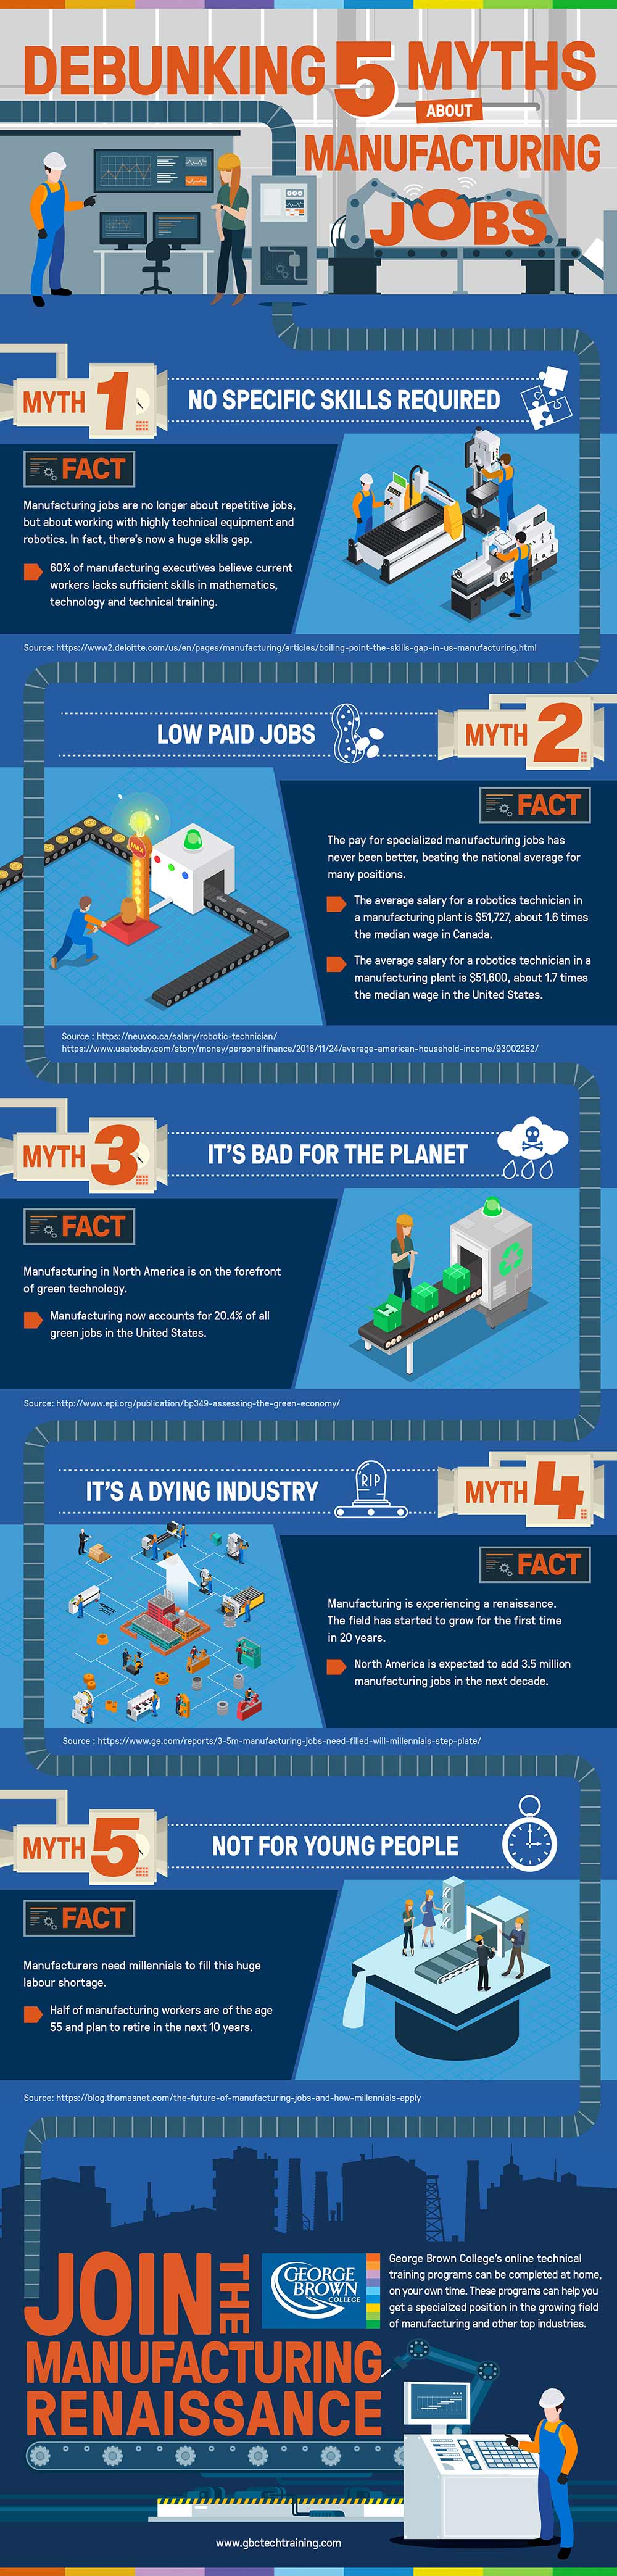 Debunking 5 Myths About Manufacturing Jobs